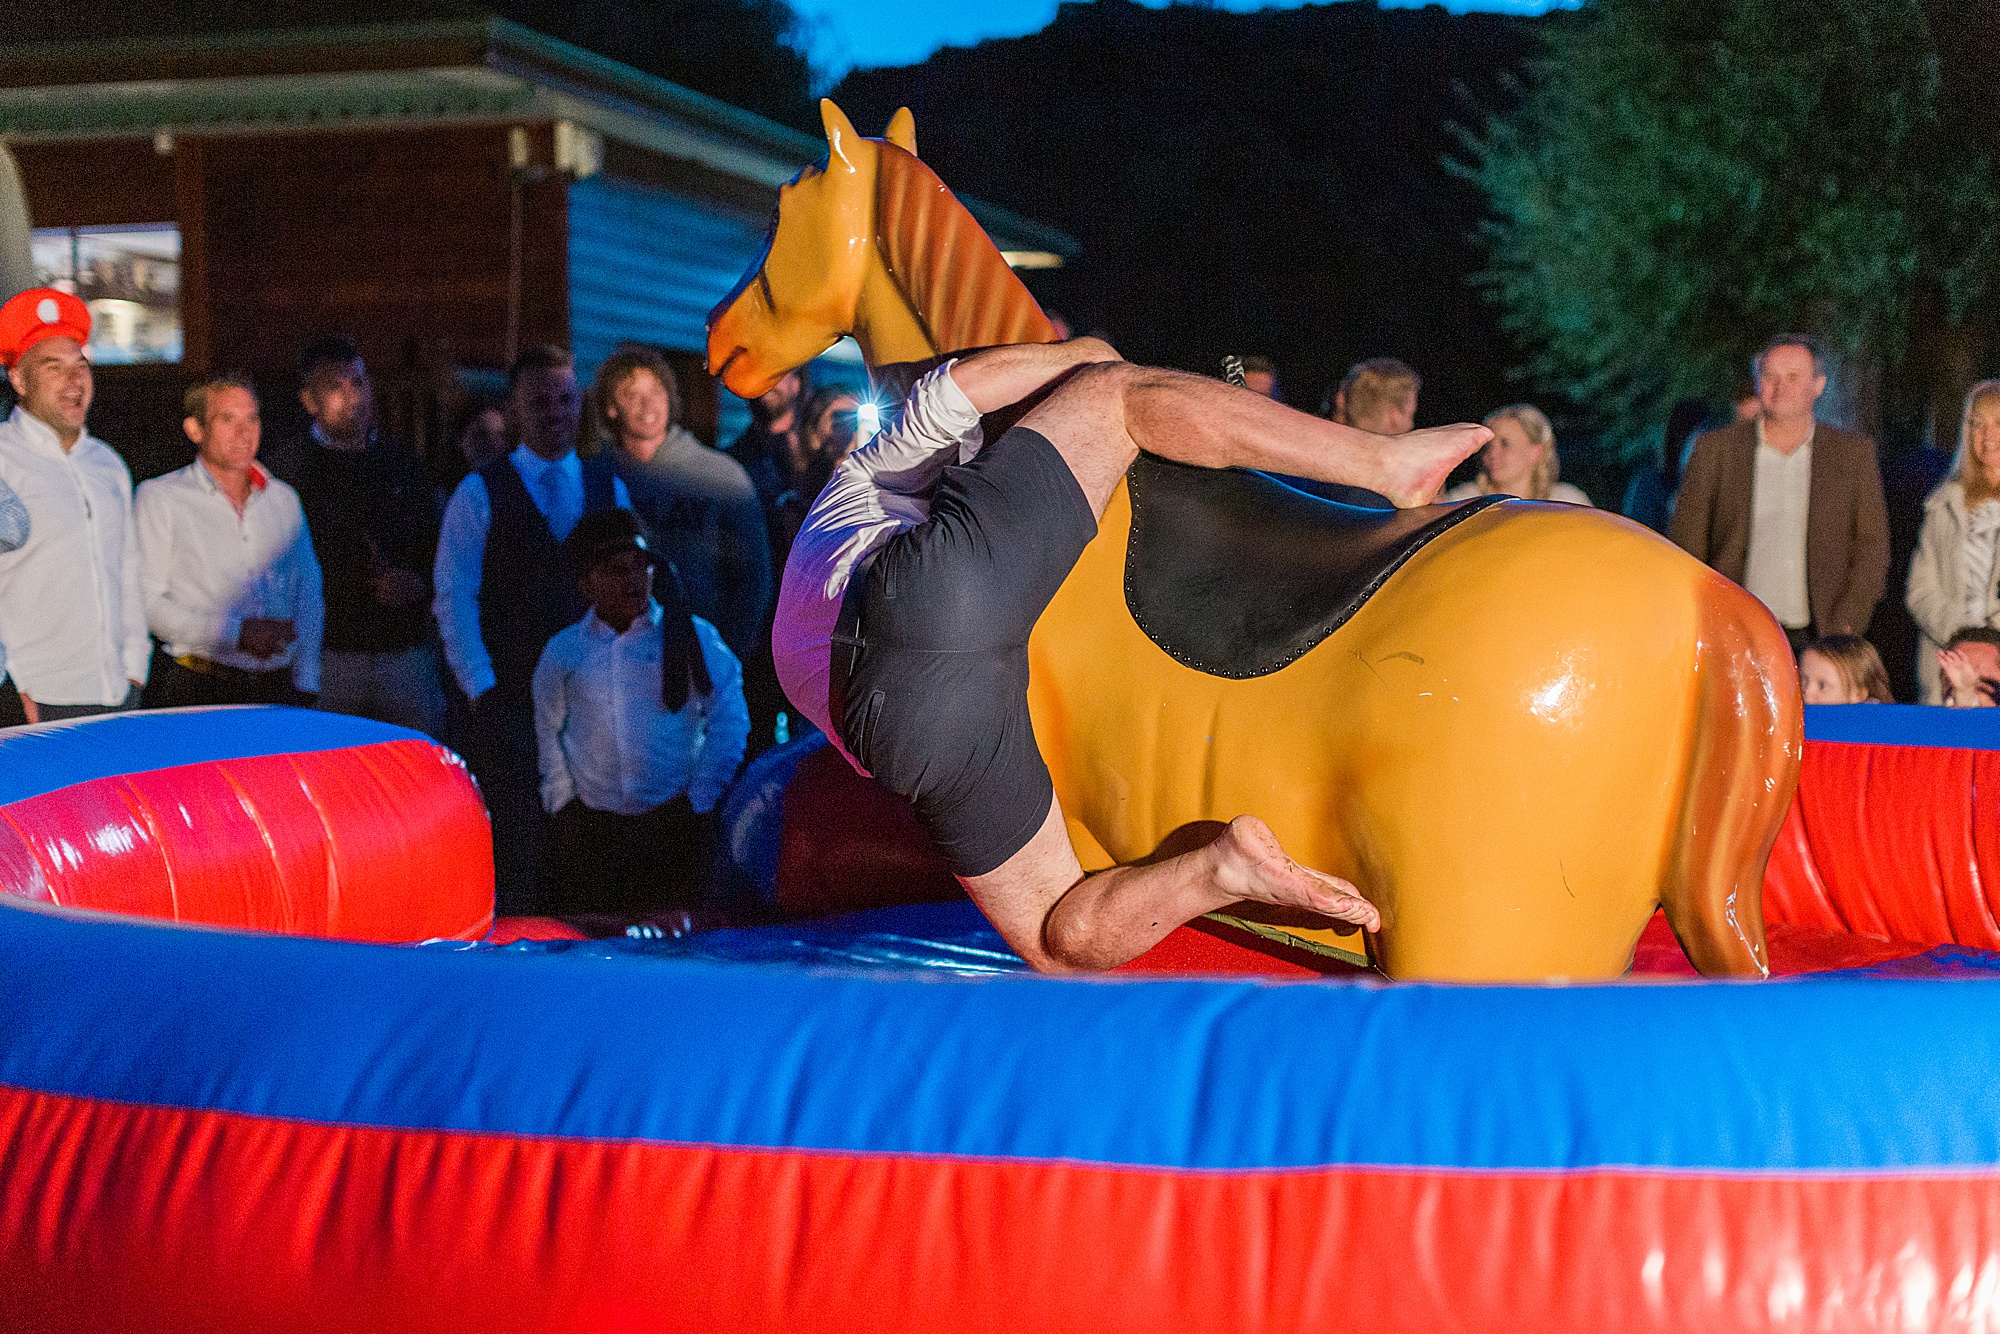 photo of a wedding guest riding a mechanical rodeo pony outside at a wedding reception with guests watching, the groom is falling from the horse and mid way to landing with his bottom and legs facing towards the camera 